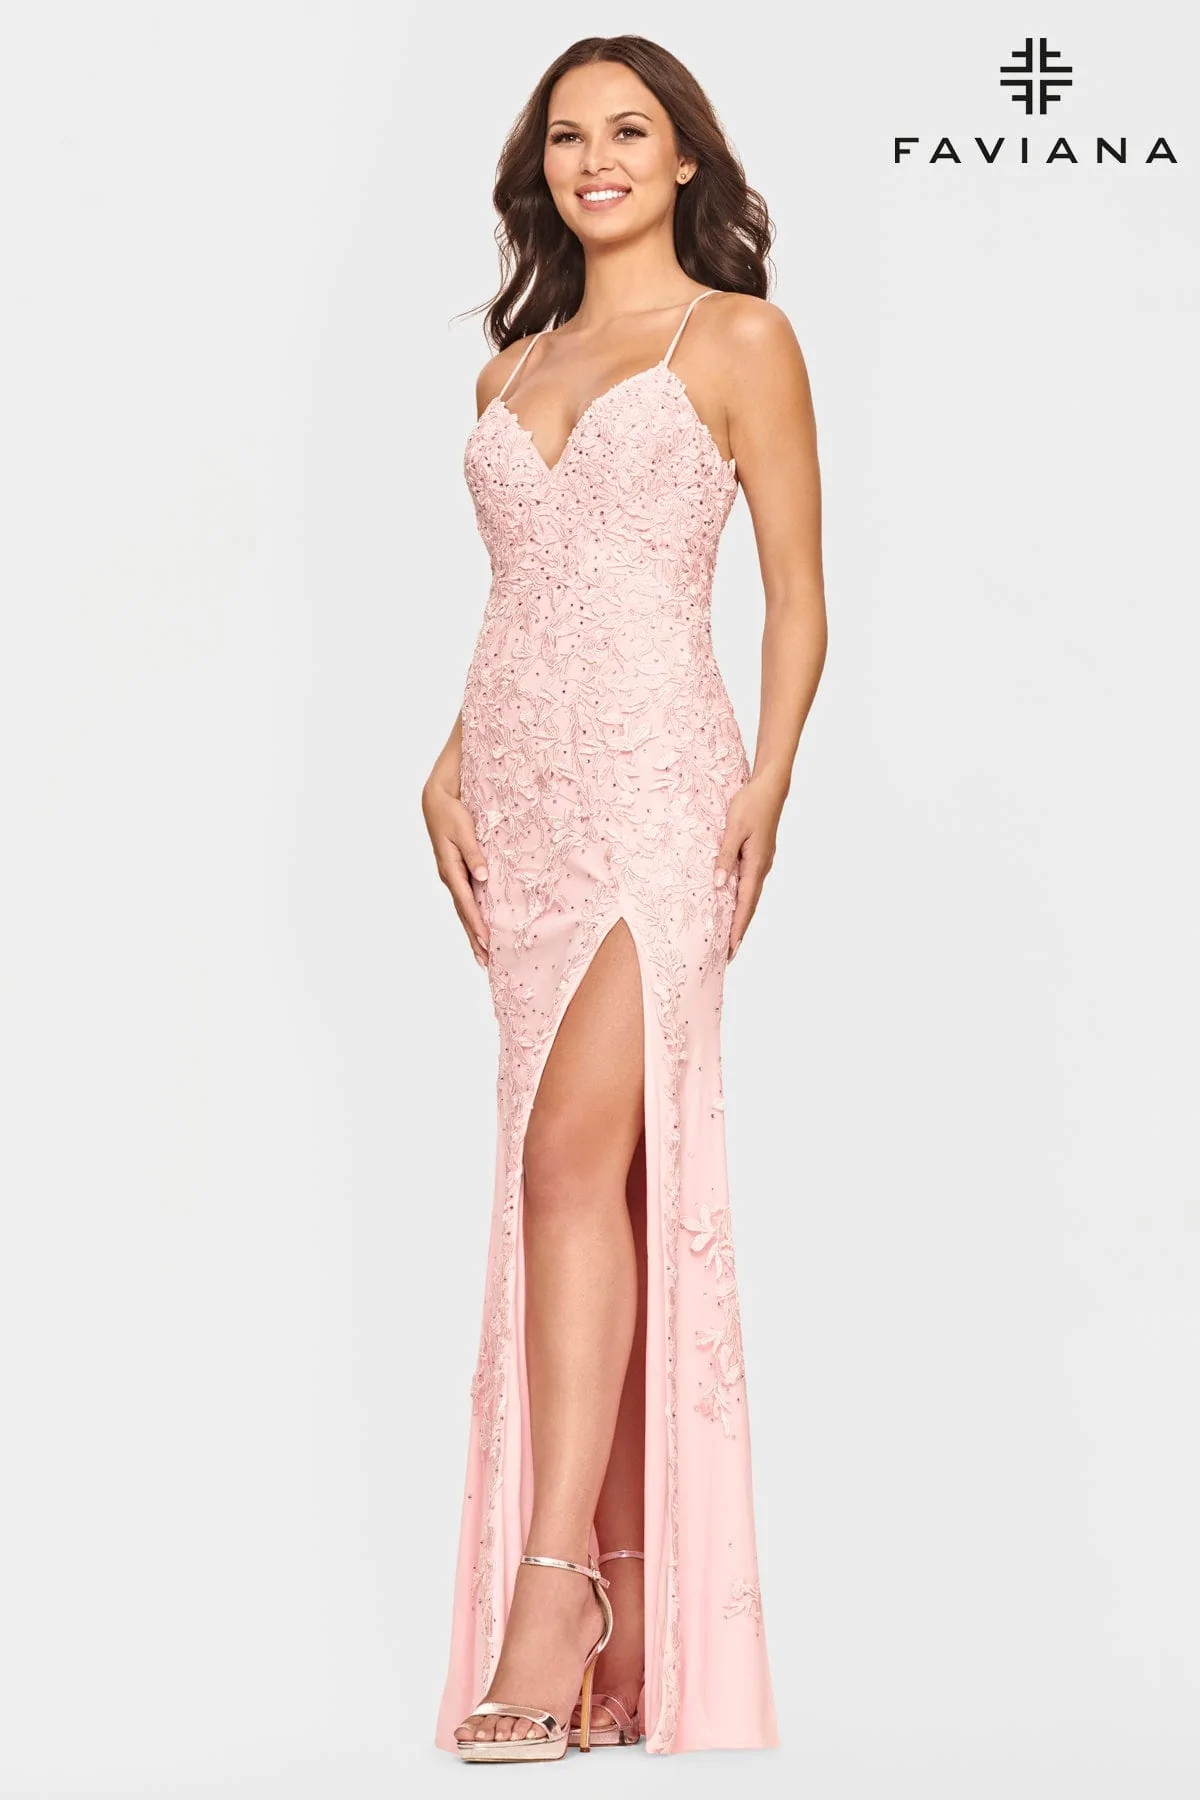 Blush beaded lace prom dress from Faviana, spaghetti straps and splt skirt, carried at Darianna Bridal & Tuxedo